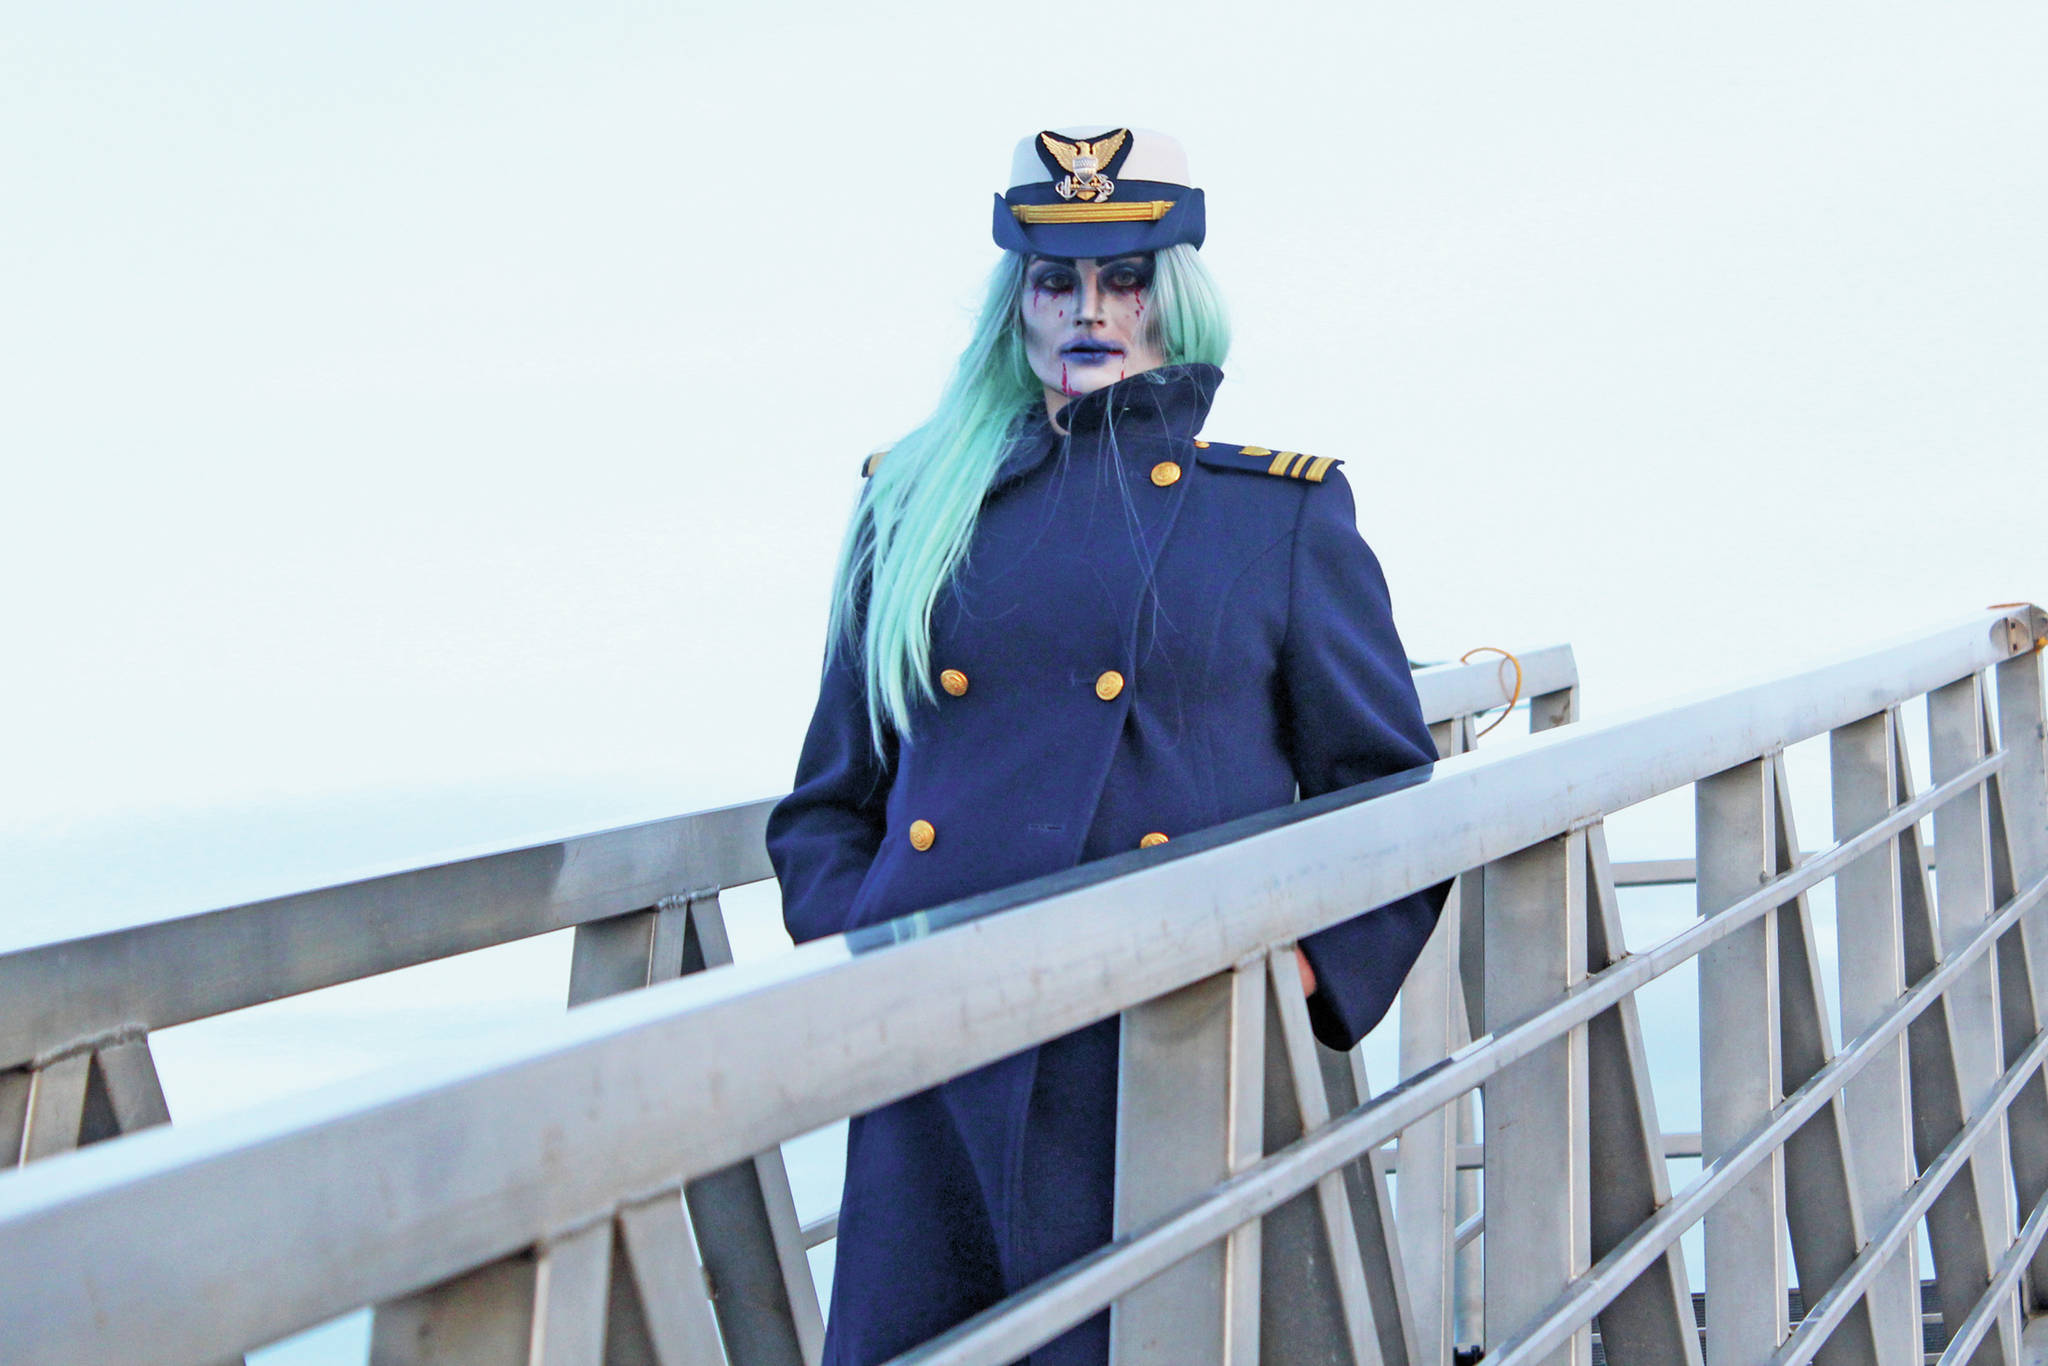 Lt. Cmdr. Jeannette Greene, captain of the US Coast Guard Cutter Hickory, prepares to greet guests at this year’s Haunted Hickory event Friday, Oct. 25, 2019 at the harbor in Homer, Alaska. Each year the crew of the Hickory transform the vessel into a haunted house for the community and collect food items as admission, all of which is given to the Homer Food Pantry. (Photo by Megan Pacer/Homer News)